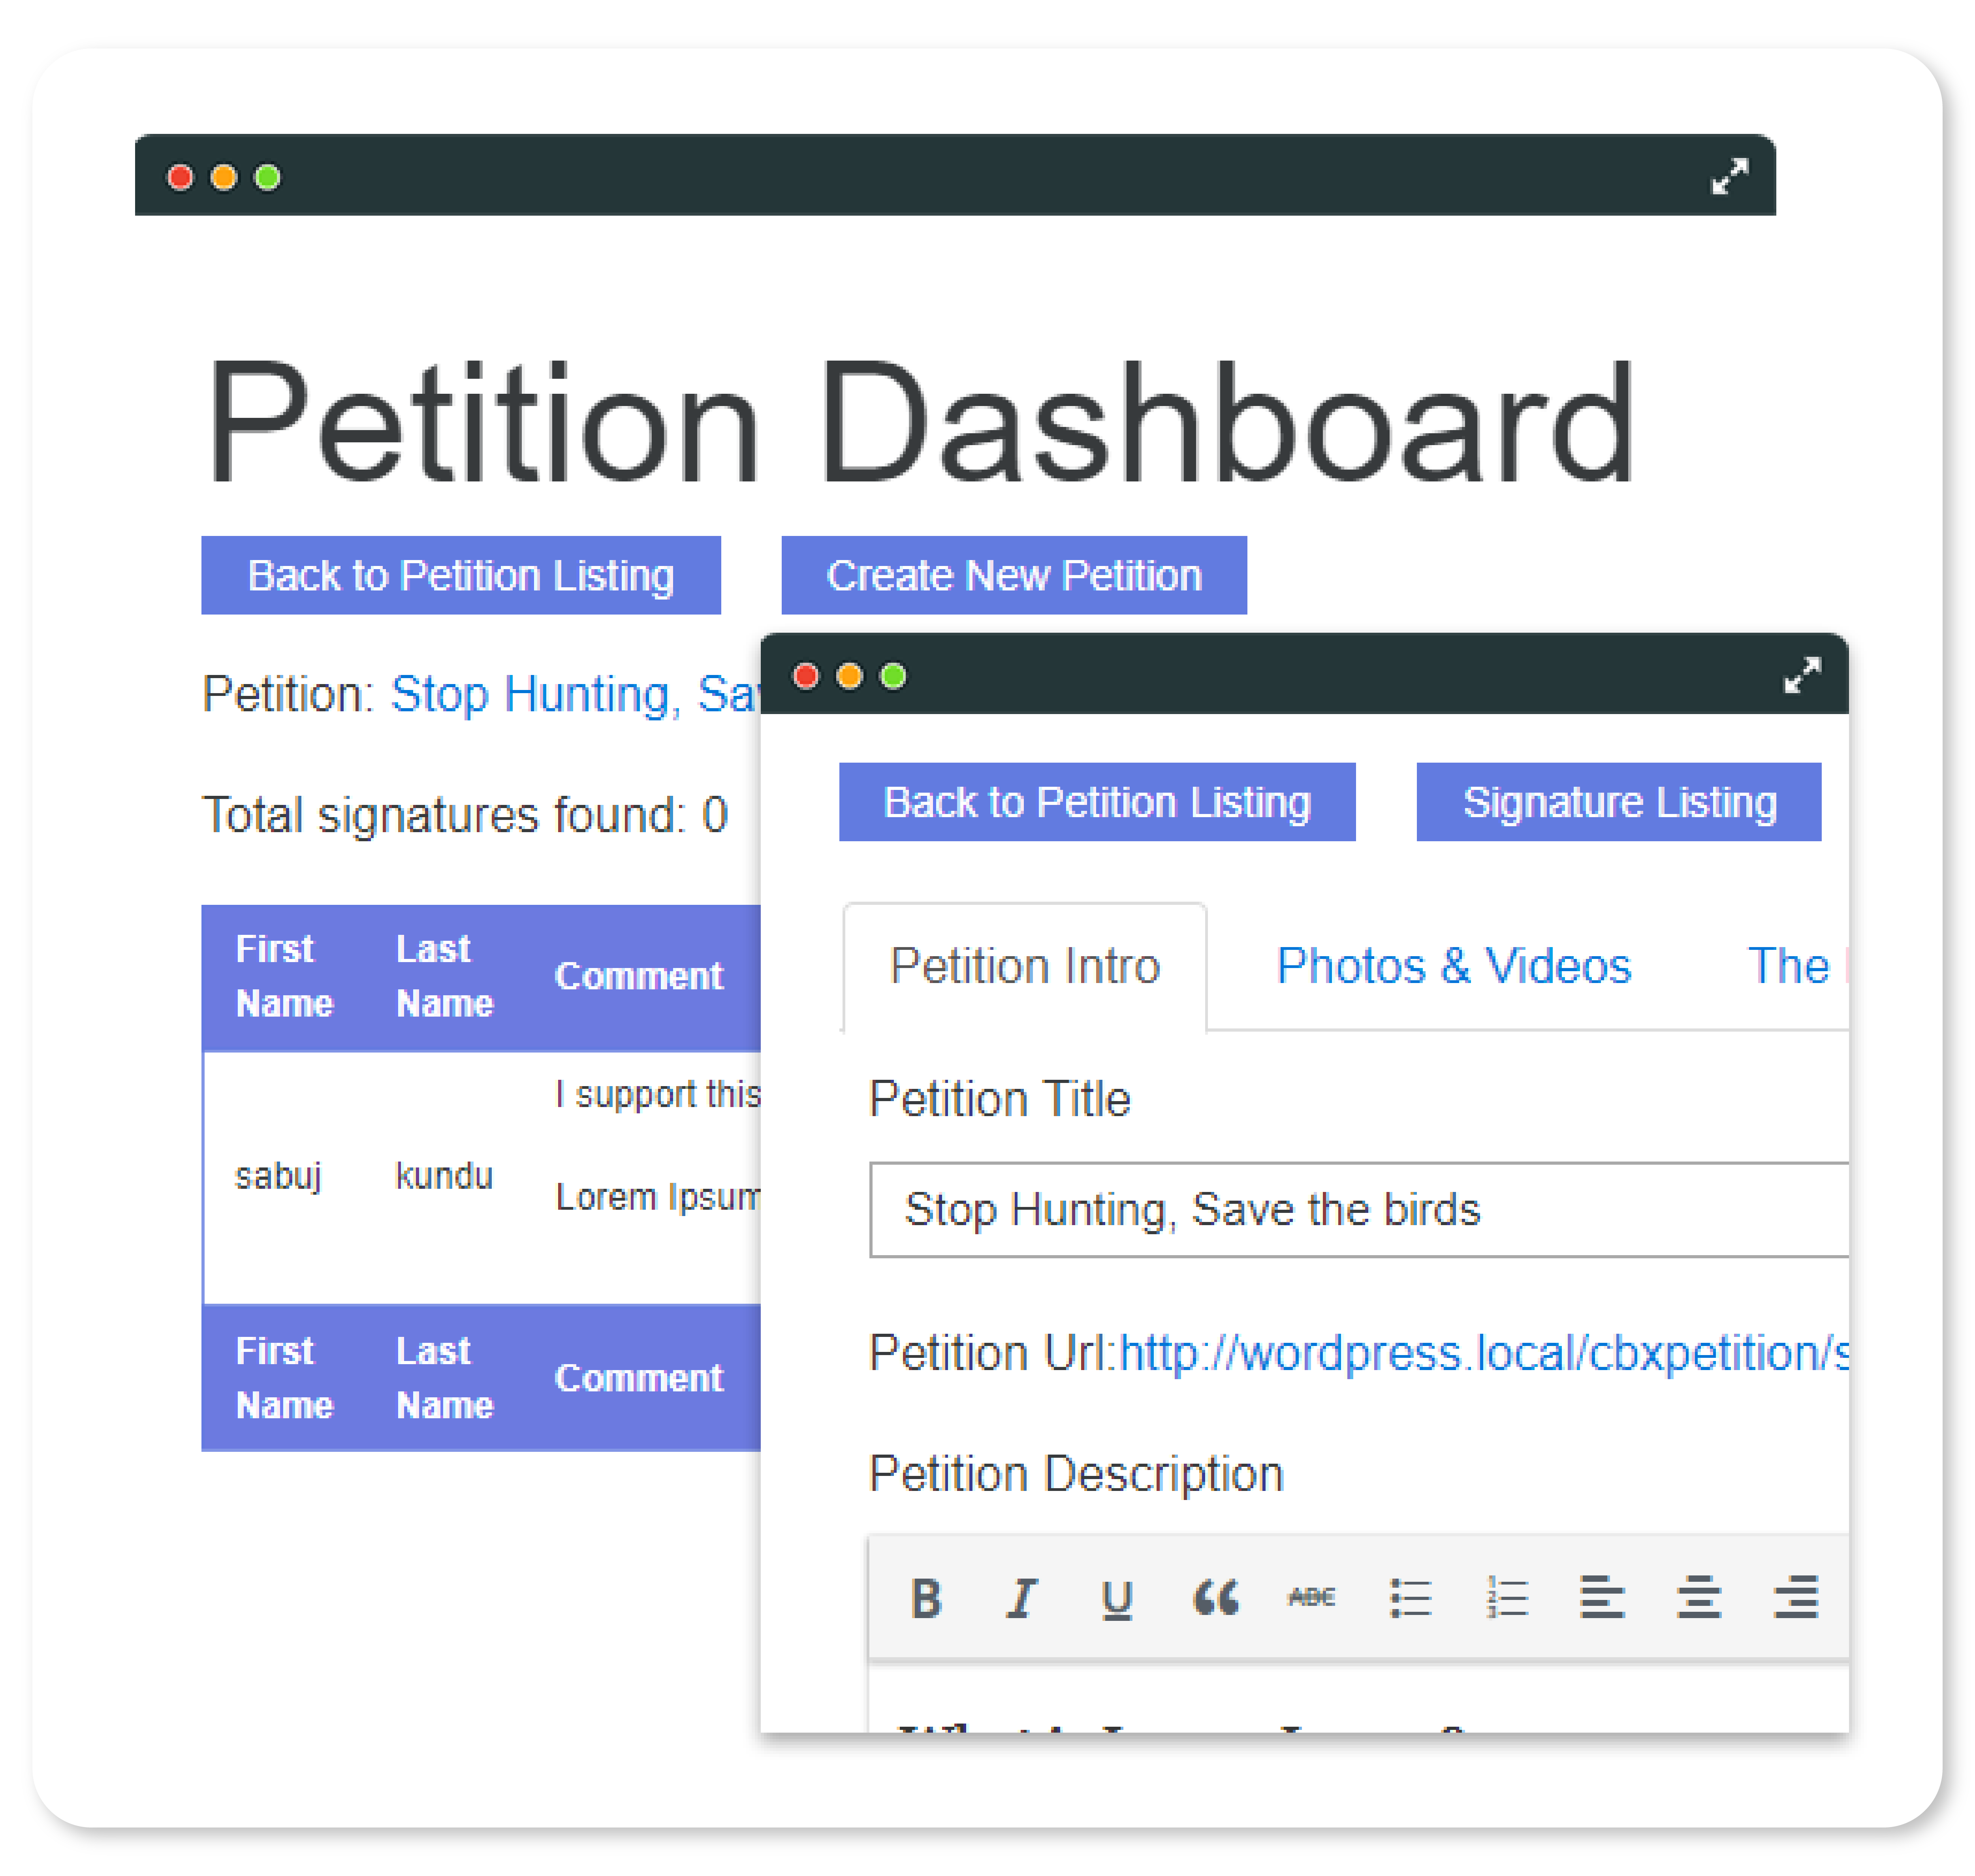 CBX Petition - Frontend User Dashboard